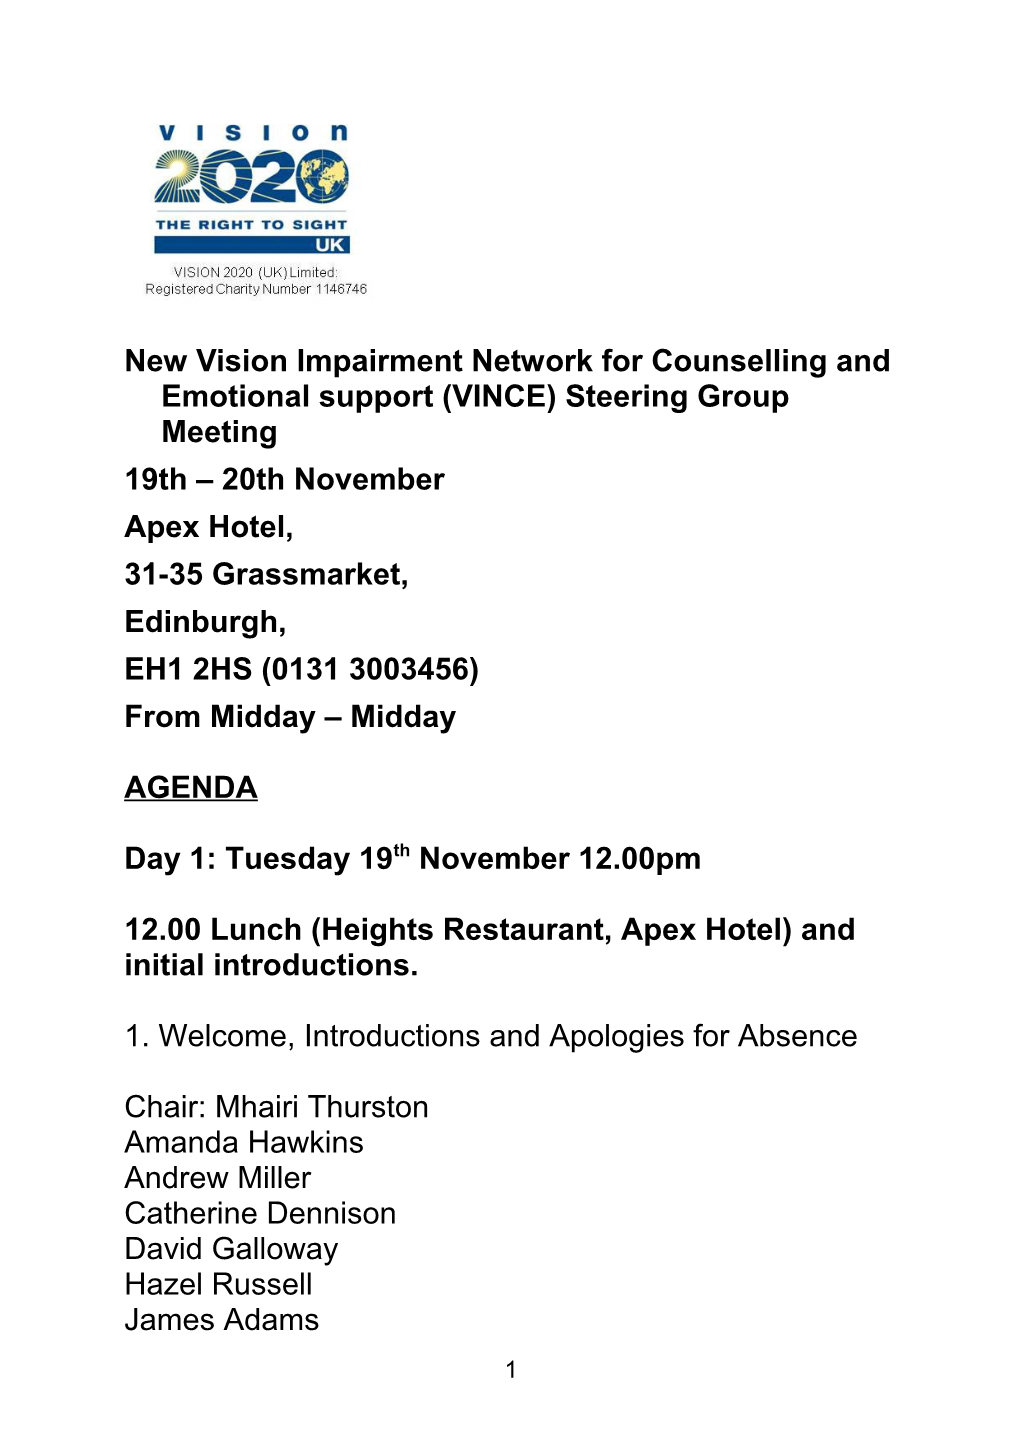 New Vision Impairment Network for Counselling and Emotional Support (VINCE)Steering Group